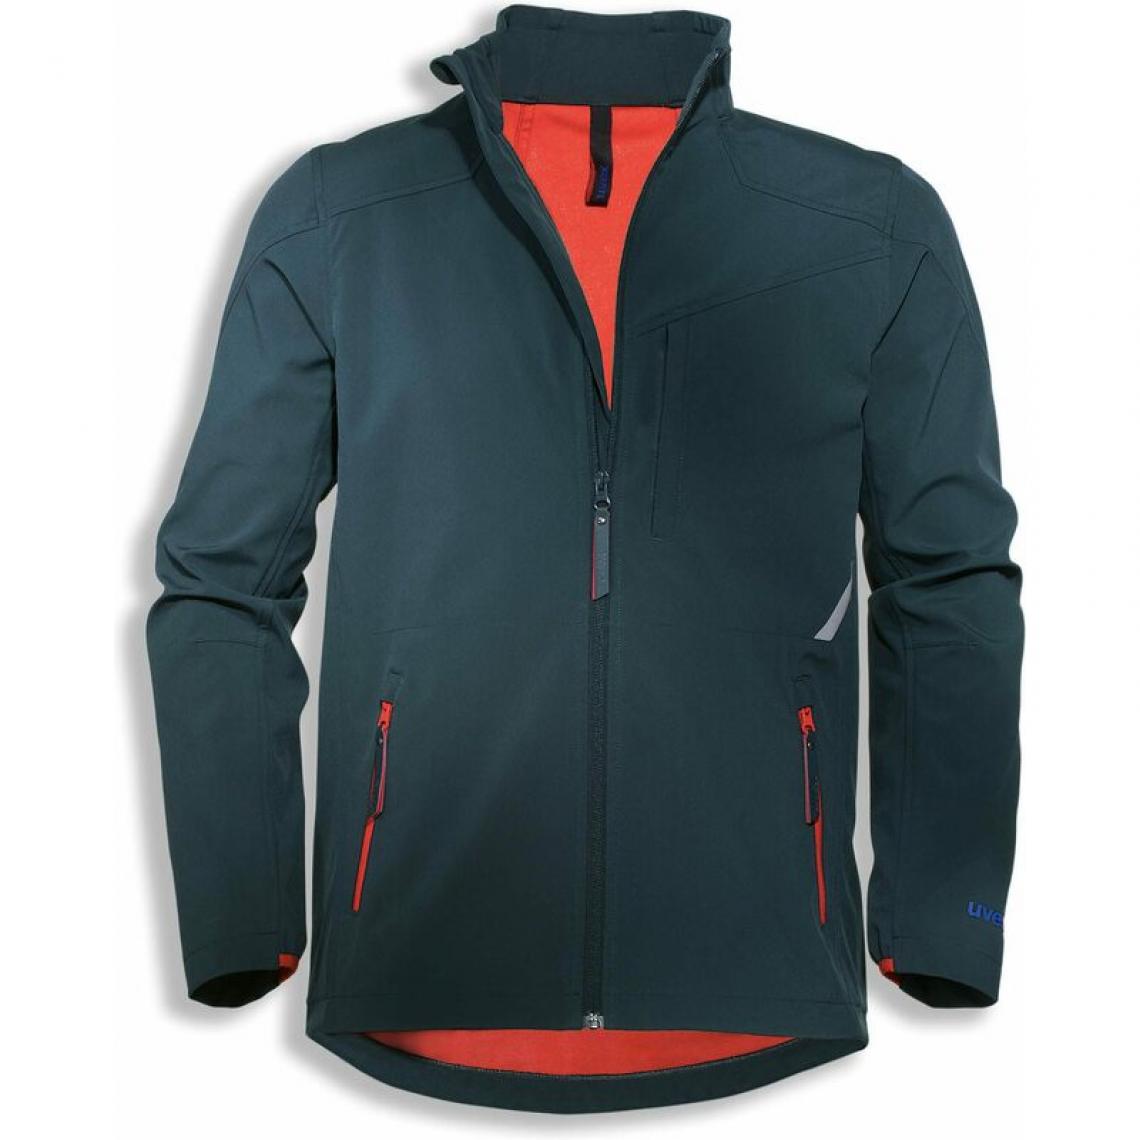 Uvex - uvex Veste Softshell suXXeed, 3XL, bleu nuit () - Protections corps